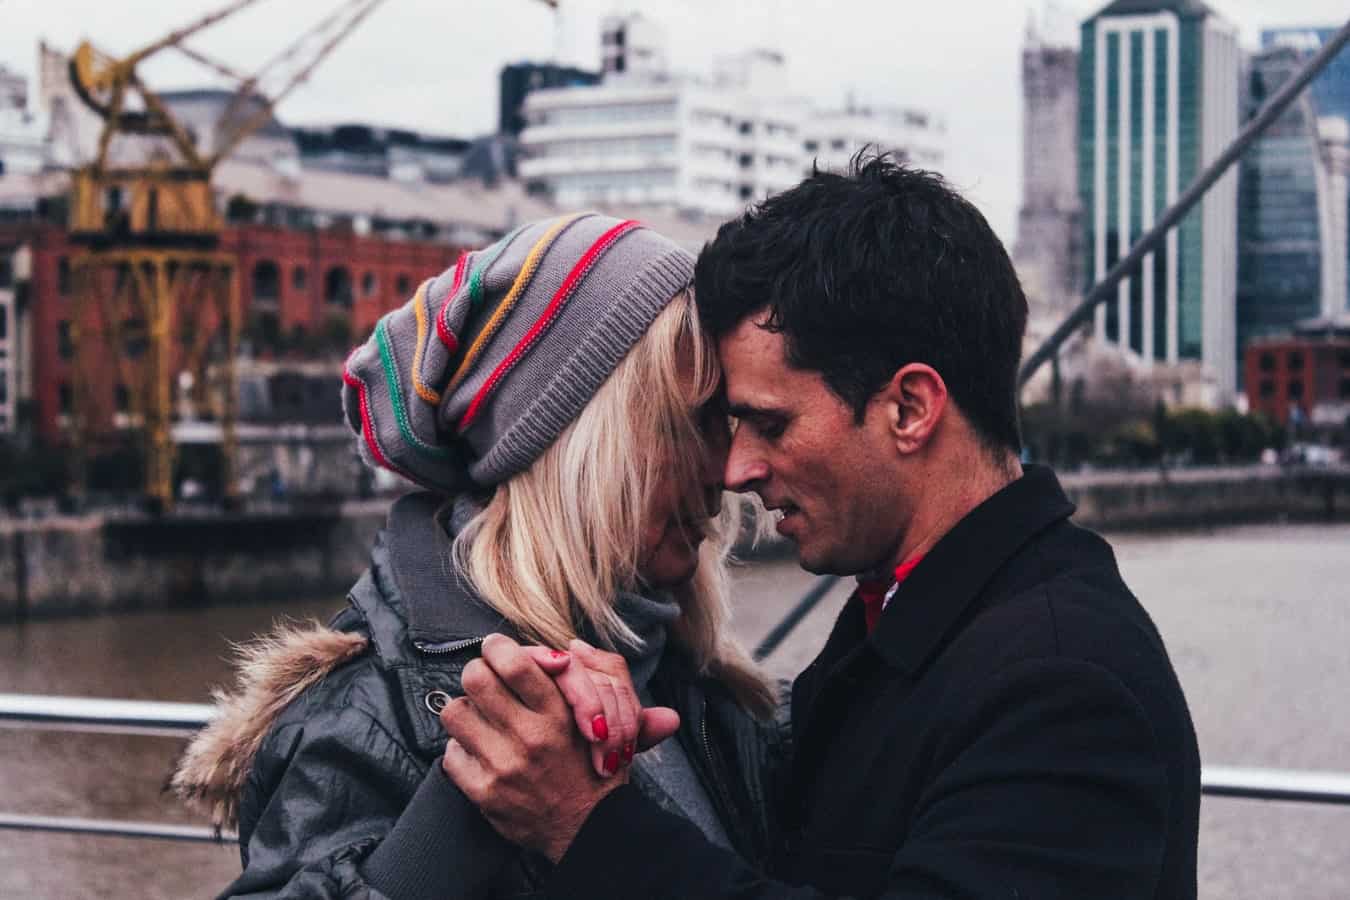 How to Know If You Have an Emotionally Unavailable Partner - LifeHack